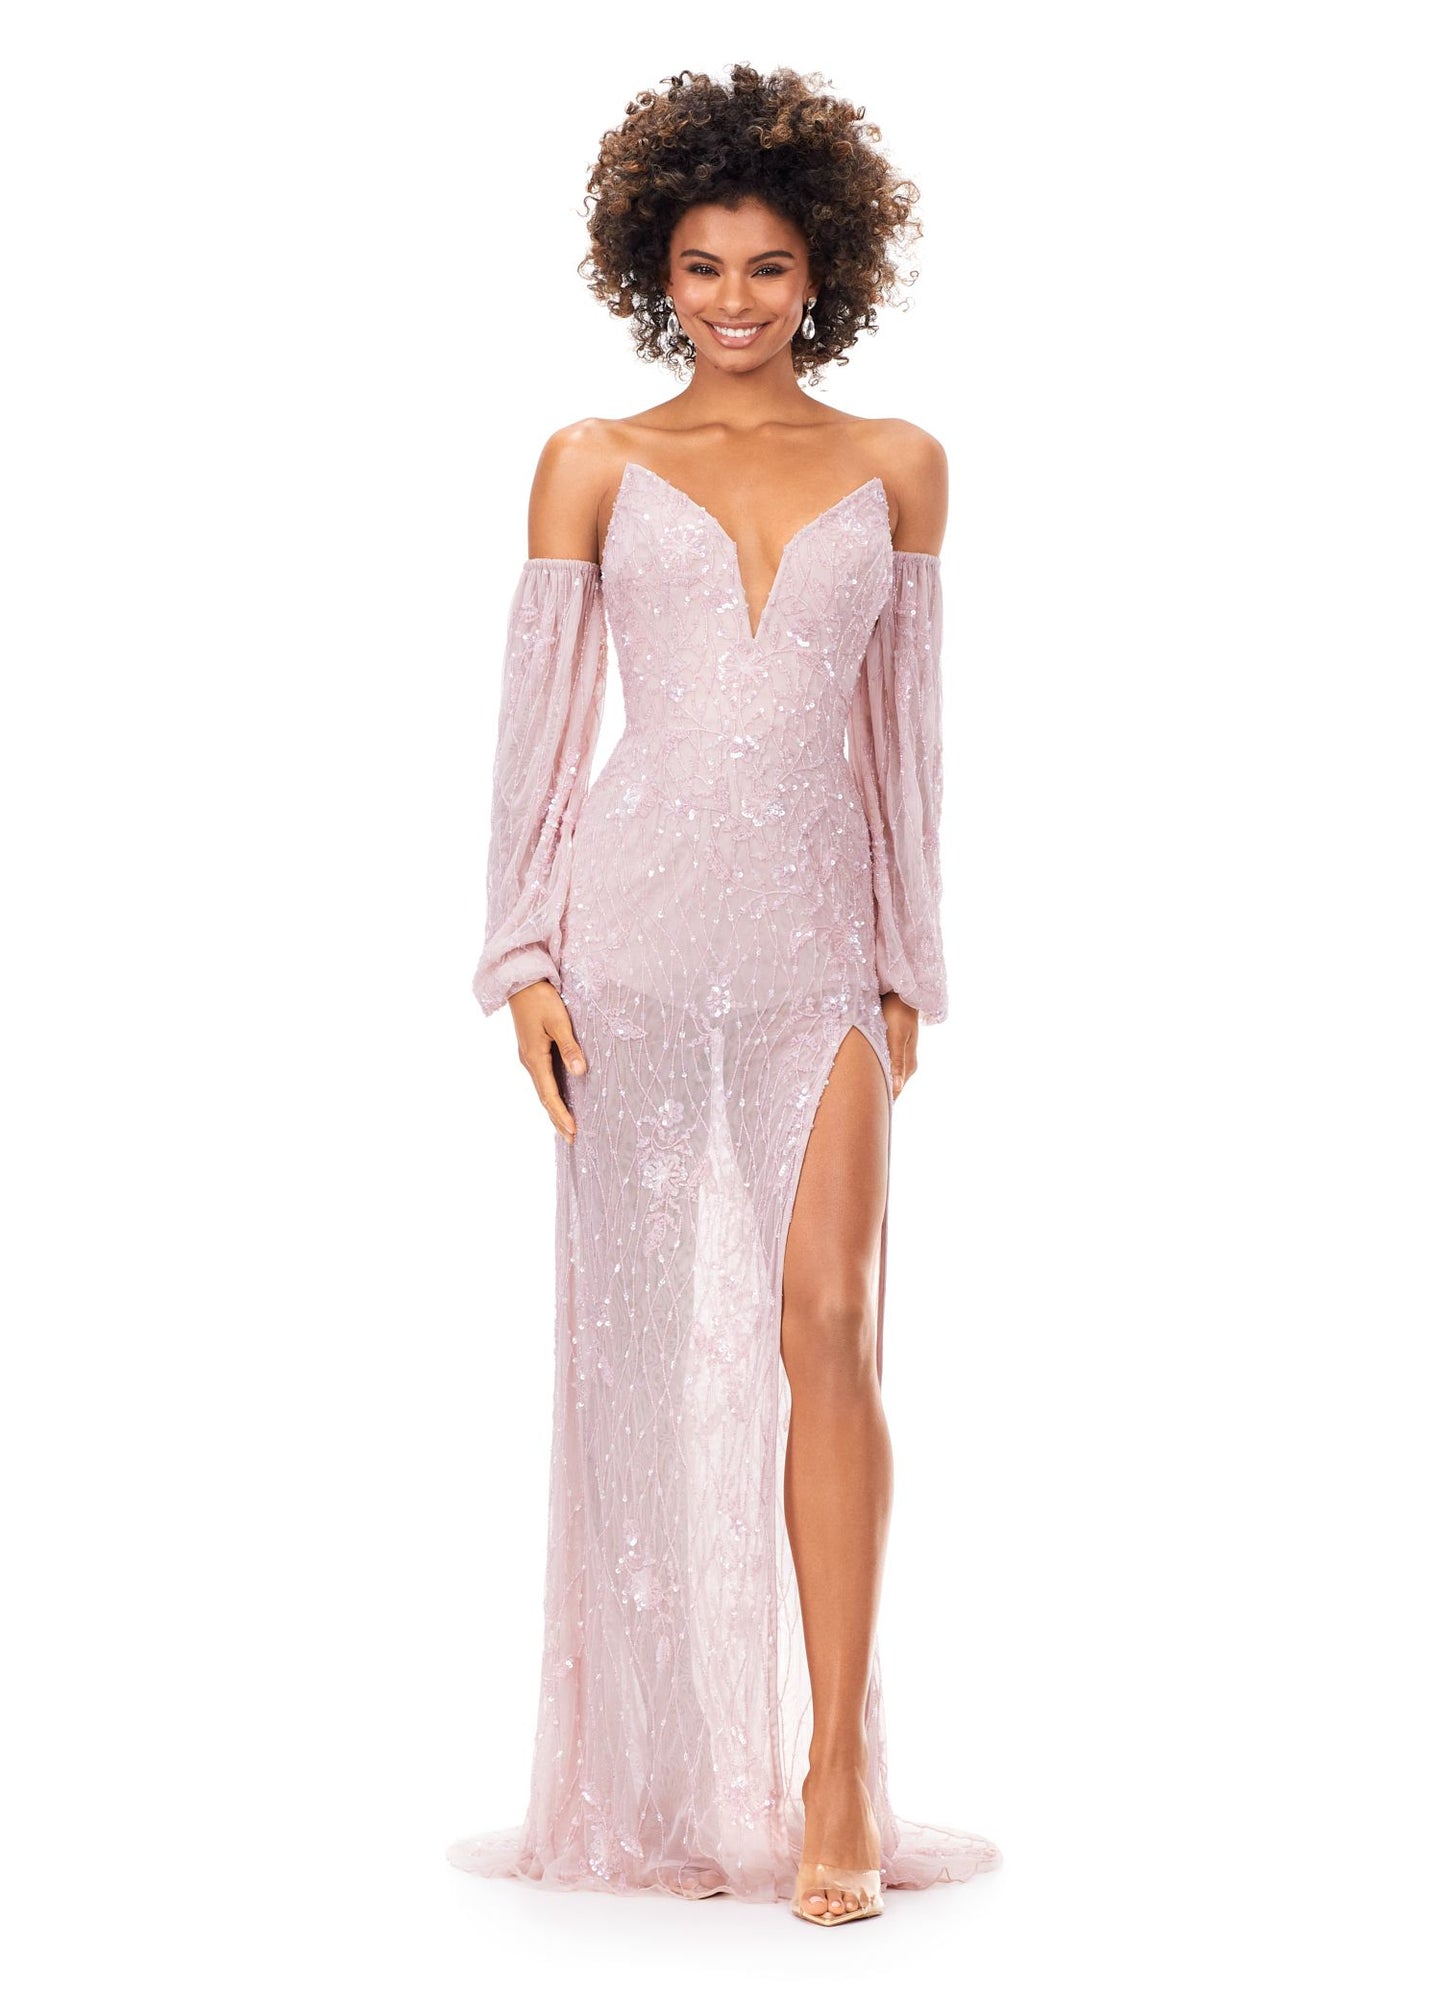 Ashley Lauren 11304 This strapless evening gown has detachable puff sleeves and is adorned with a floral hand beaded design. The dress is lined with a built in romper. The look is complete with a left leg slit. Strapless Bustier Detachable Puff Sleeves Romper Lining Left Leg Slit COLORS: Ice Pink, Ivory, Ice Blue